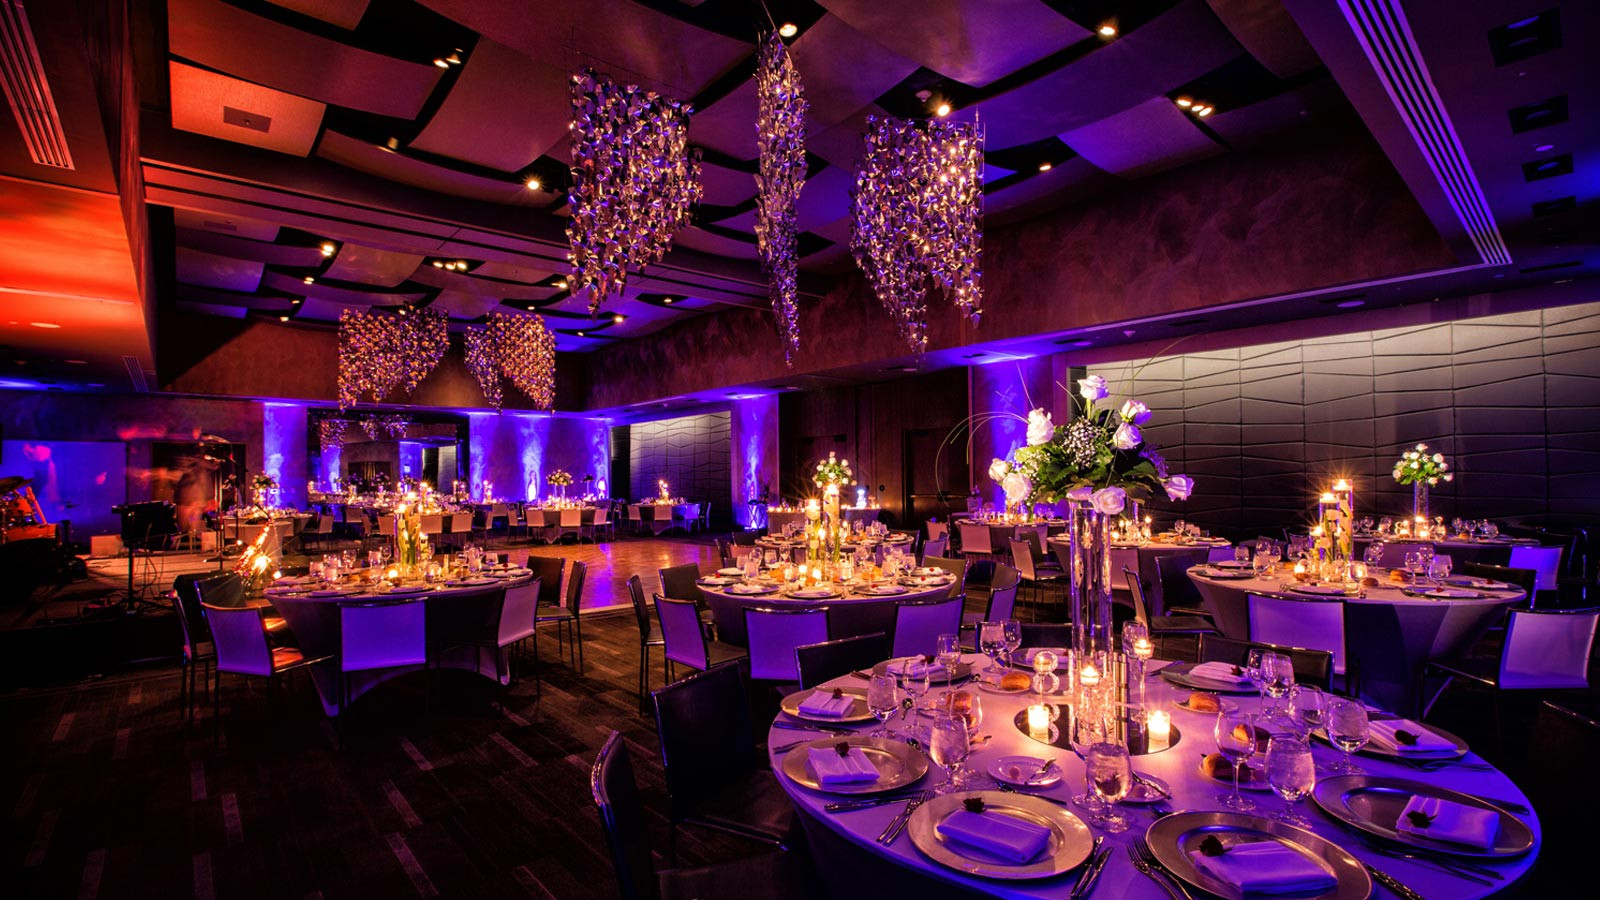 Best Wedding Venues Fort Lauderdale Fl in the world Learn more here 